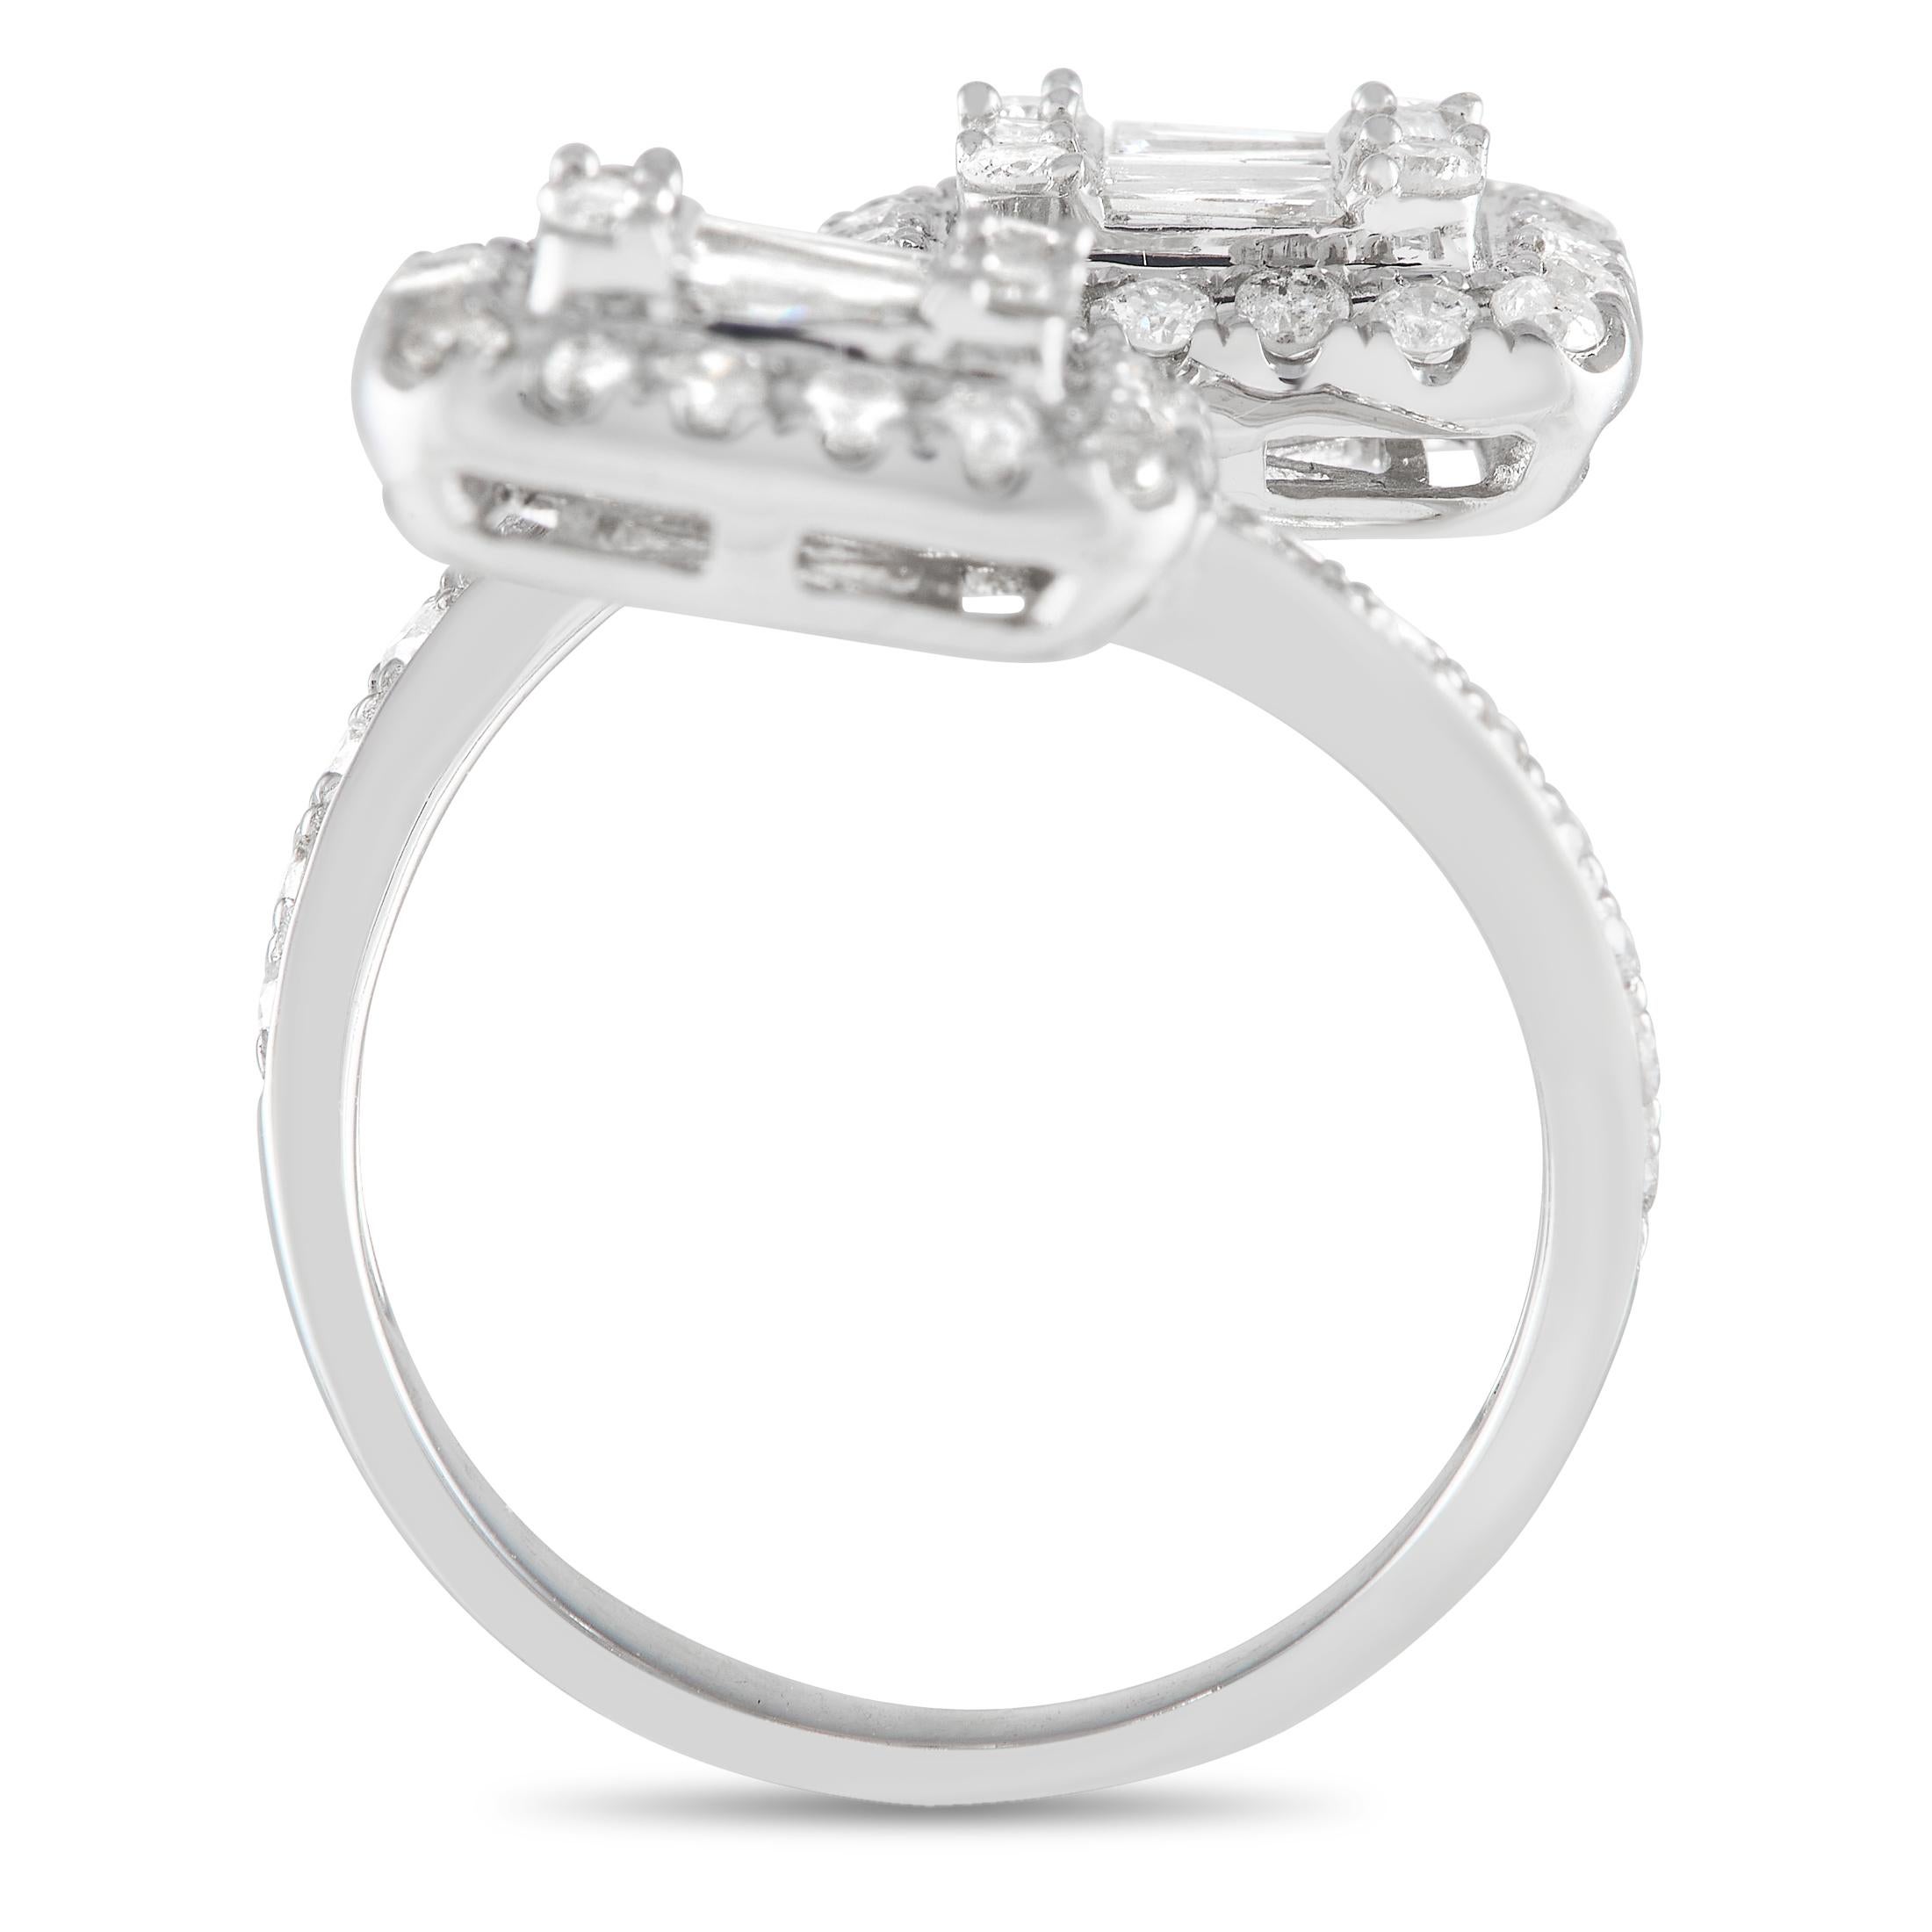 Opt for this piece when you want to update your look in an instant. This 14K white gold ring has an open bypass shank with the shoulders traced with diamonds. The shank's tips feature a cluster of diamonds in varying cuts framed by a rounded square